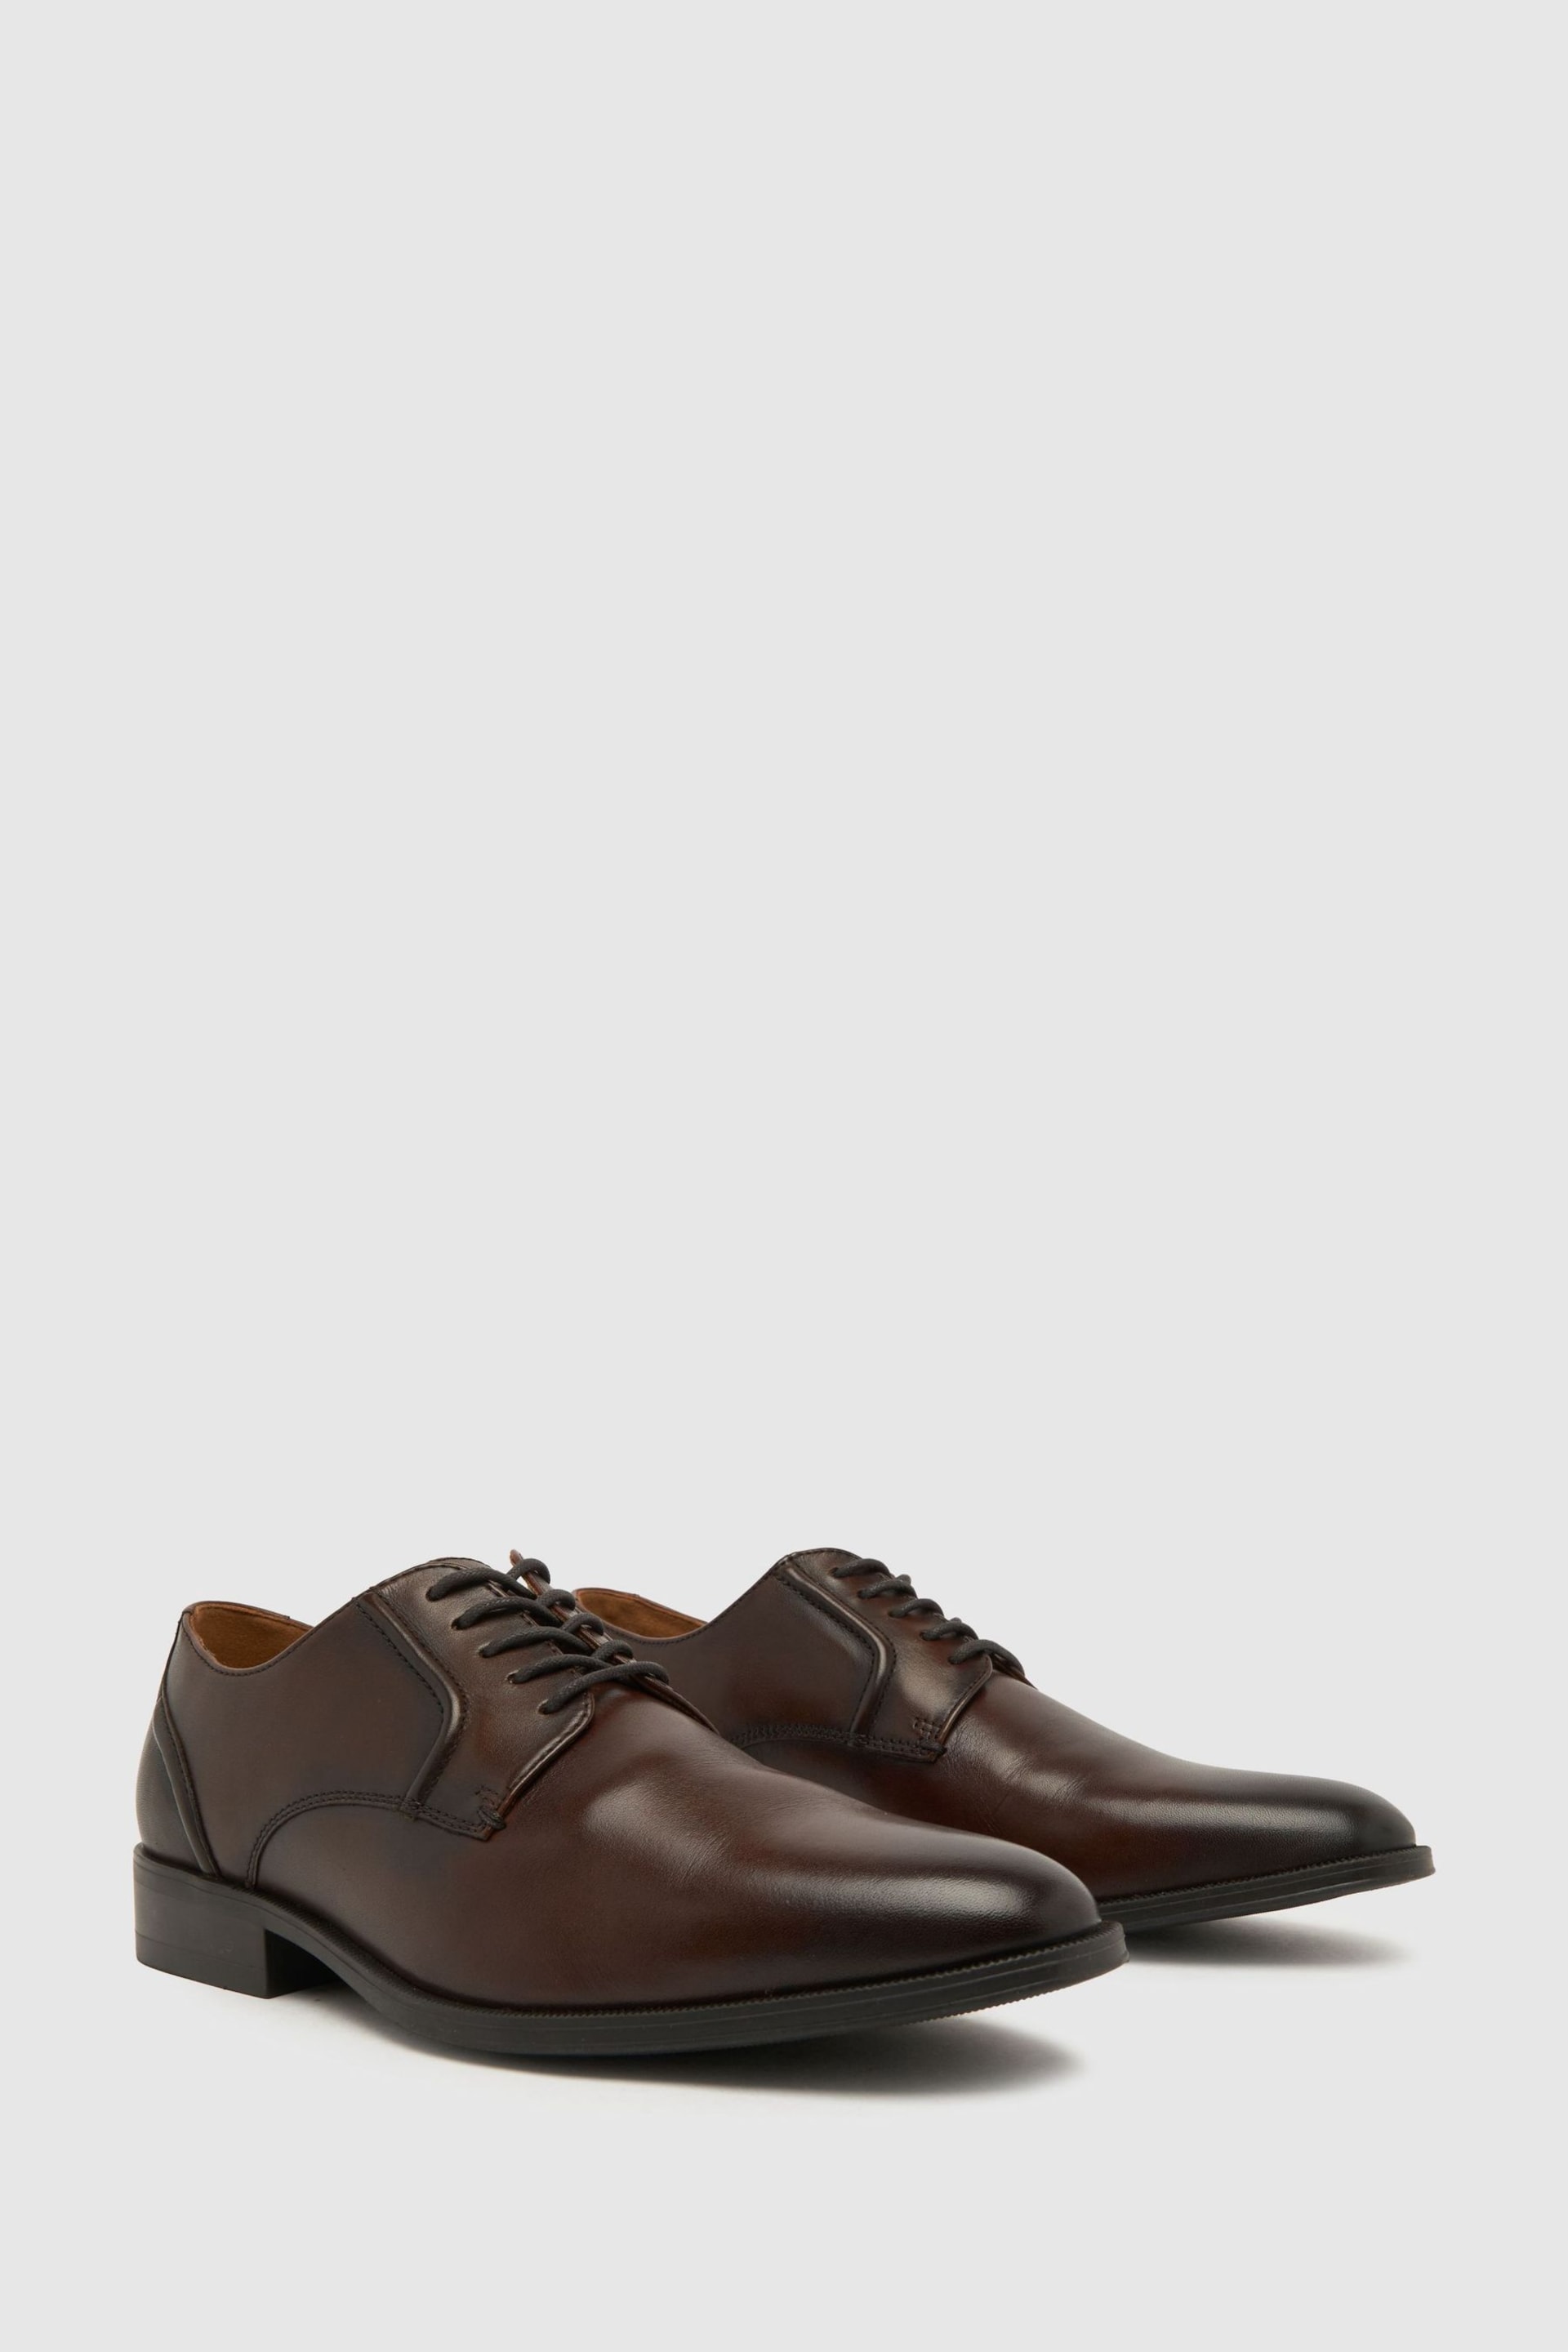 Schuh Reilly Leather Lace-Up Shoes - Image 2 of 4